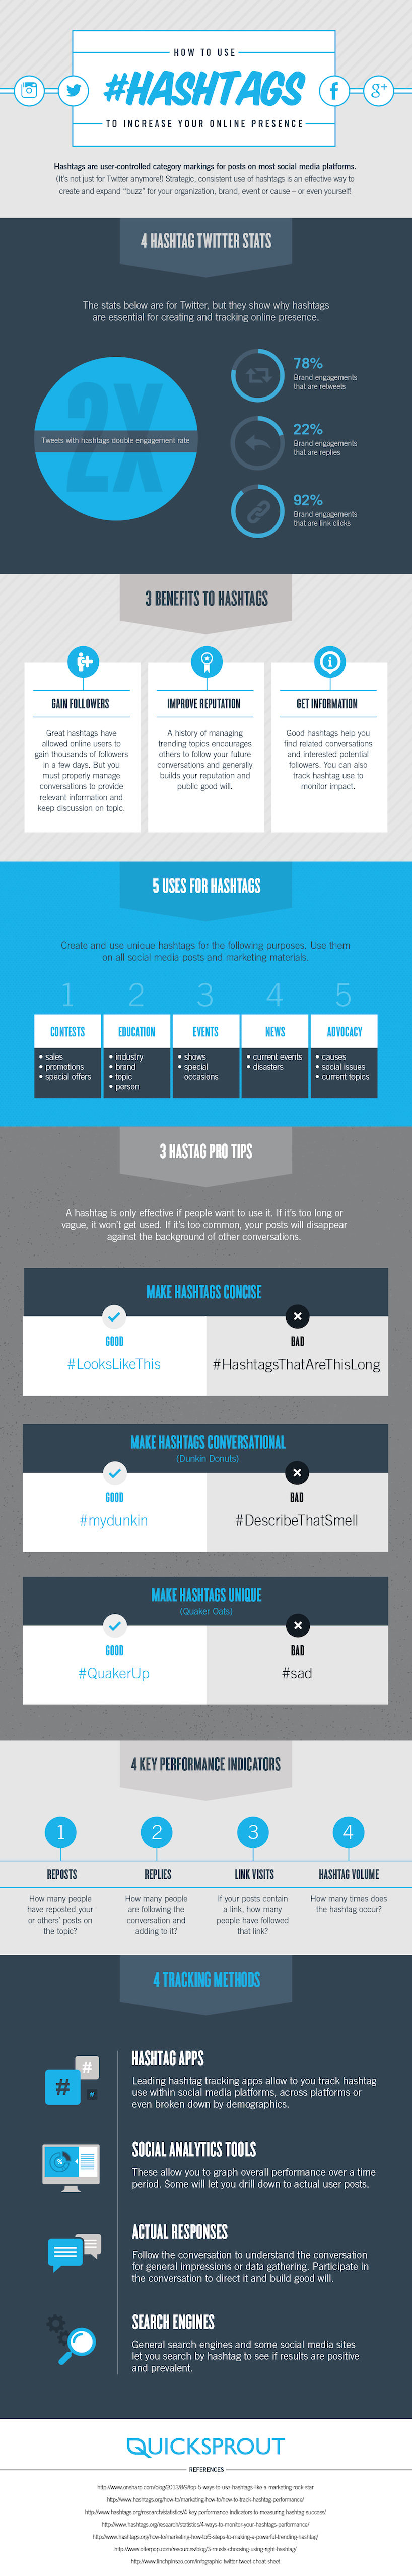 How to Use Hashtags to Increase Your Online Presence